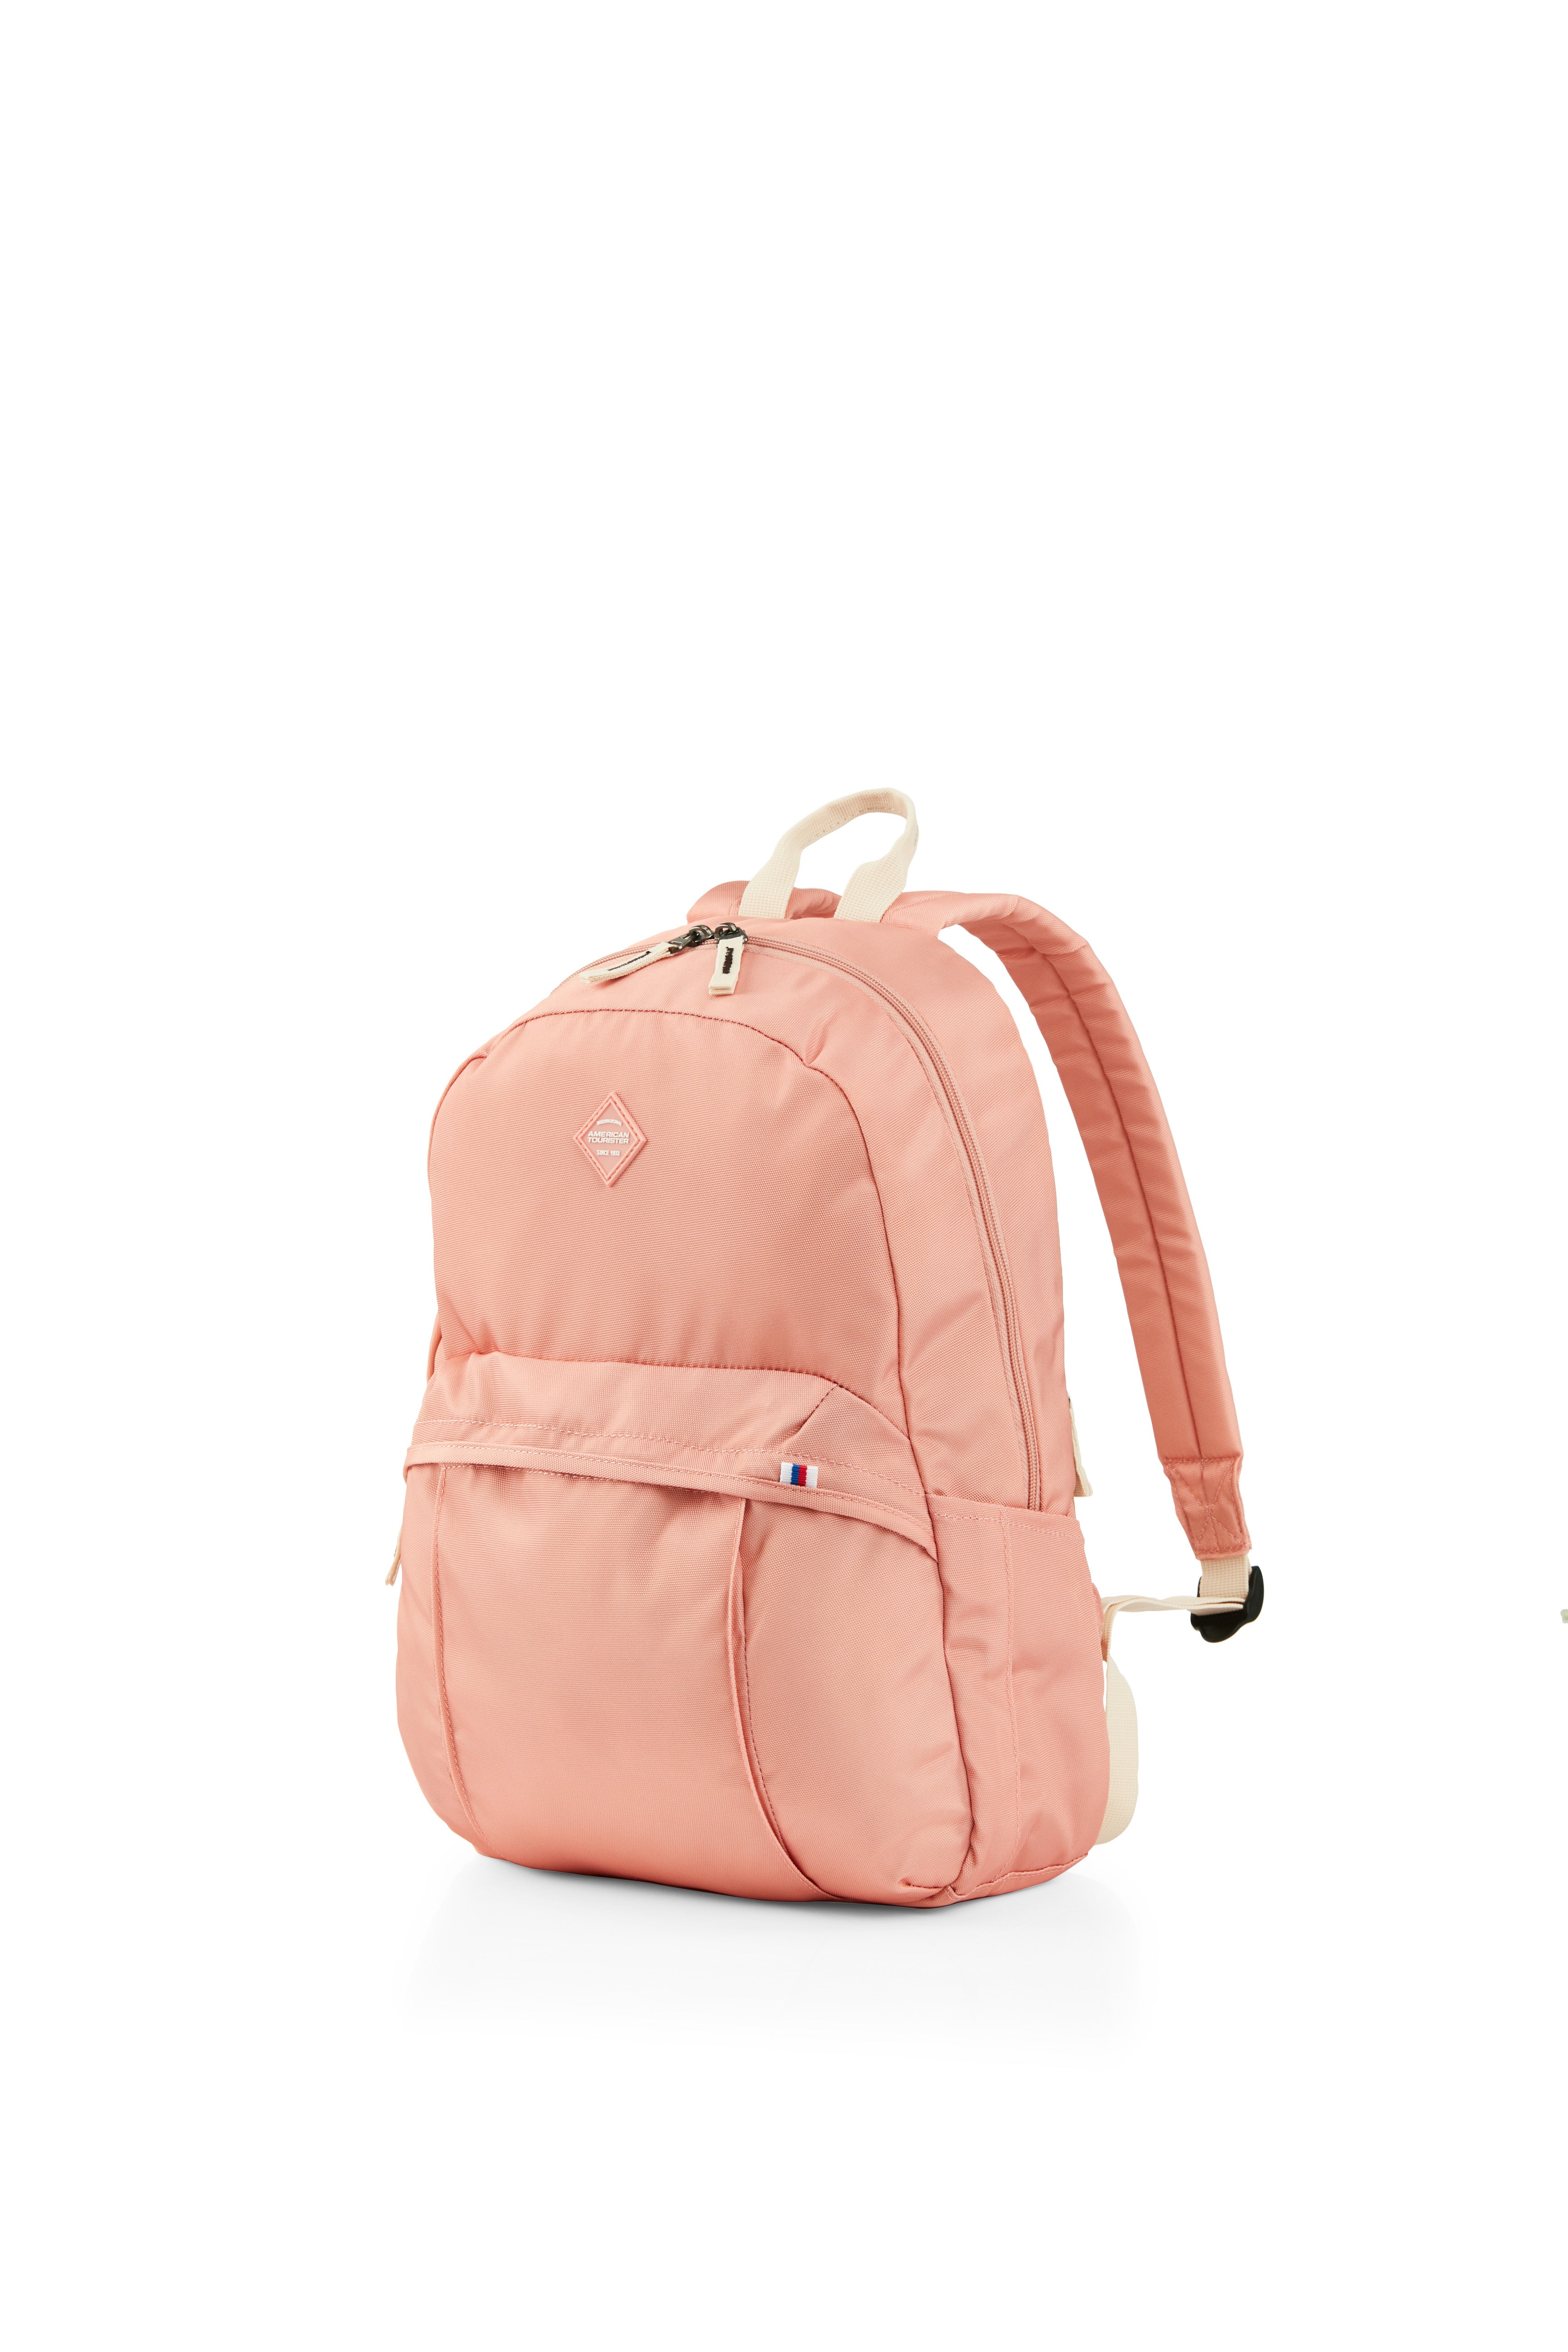 American Tourister - RUDY Small Fashion Backpack - Apricot Ice-1